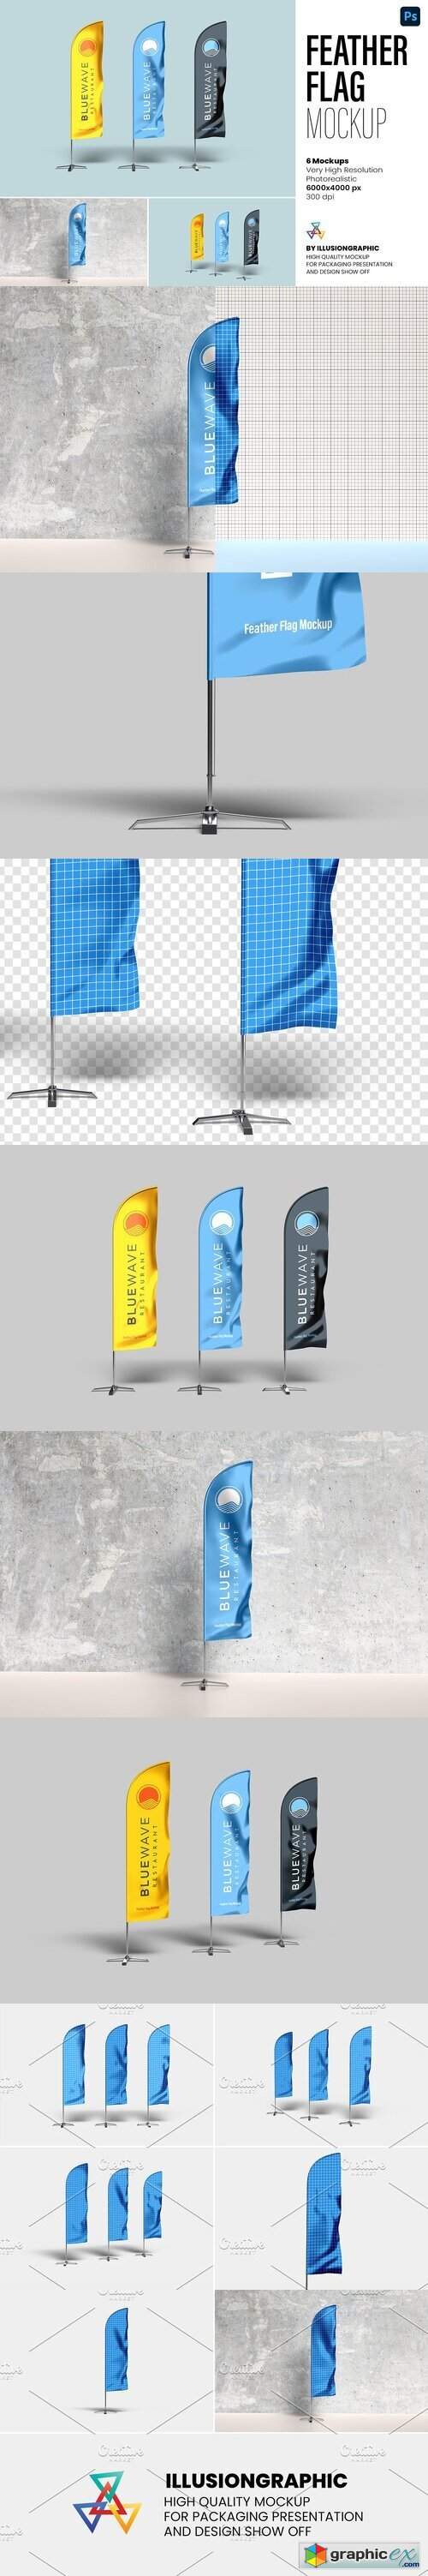 Feather Flag Mockup - 6 Views 